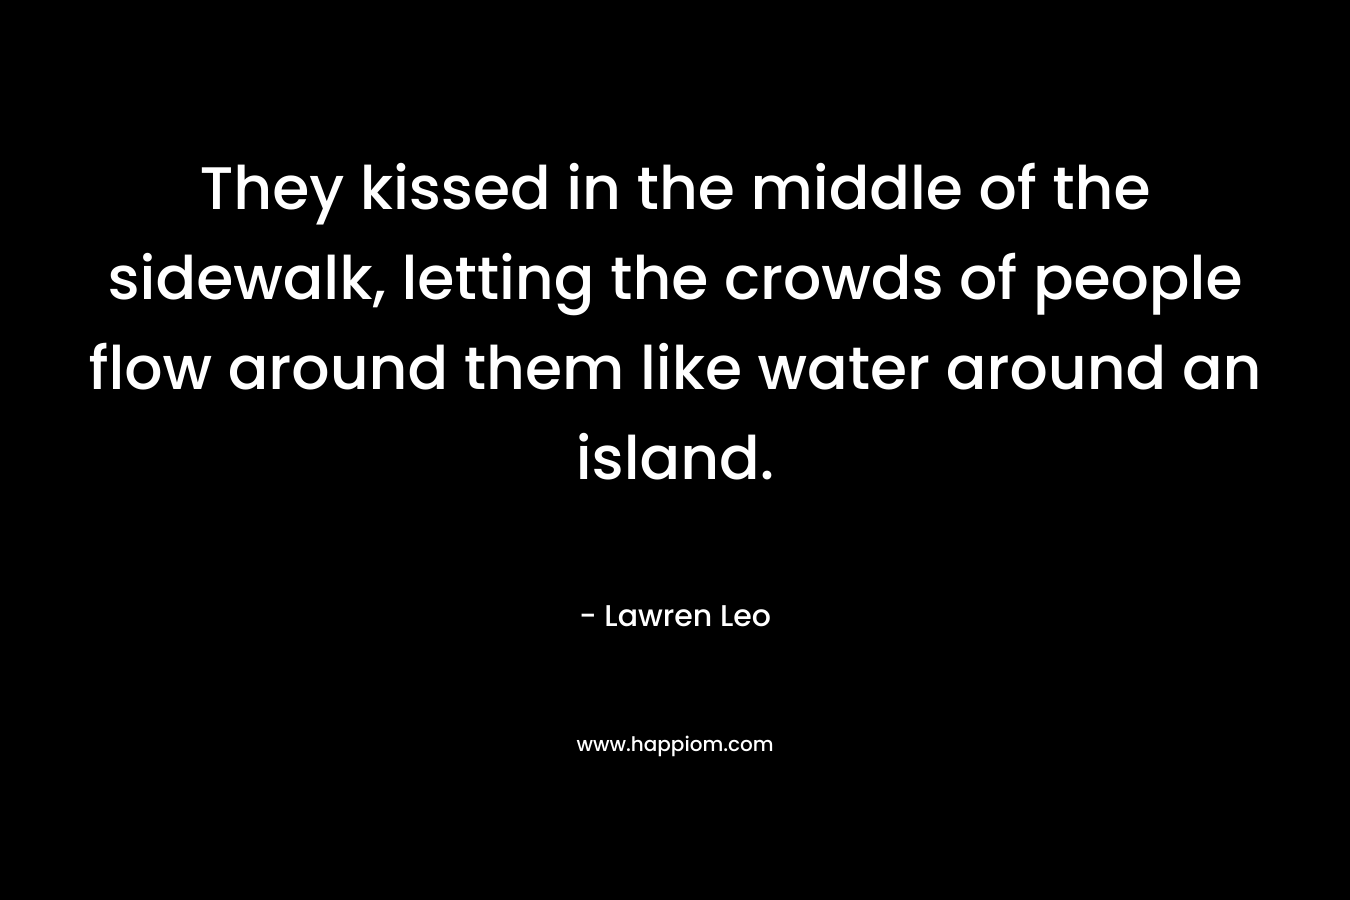 They kissed in the middle of the sidewalk, letting the crowds of people flow around them like water around an island.